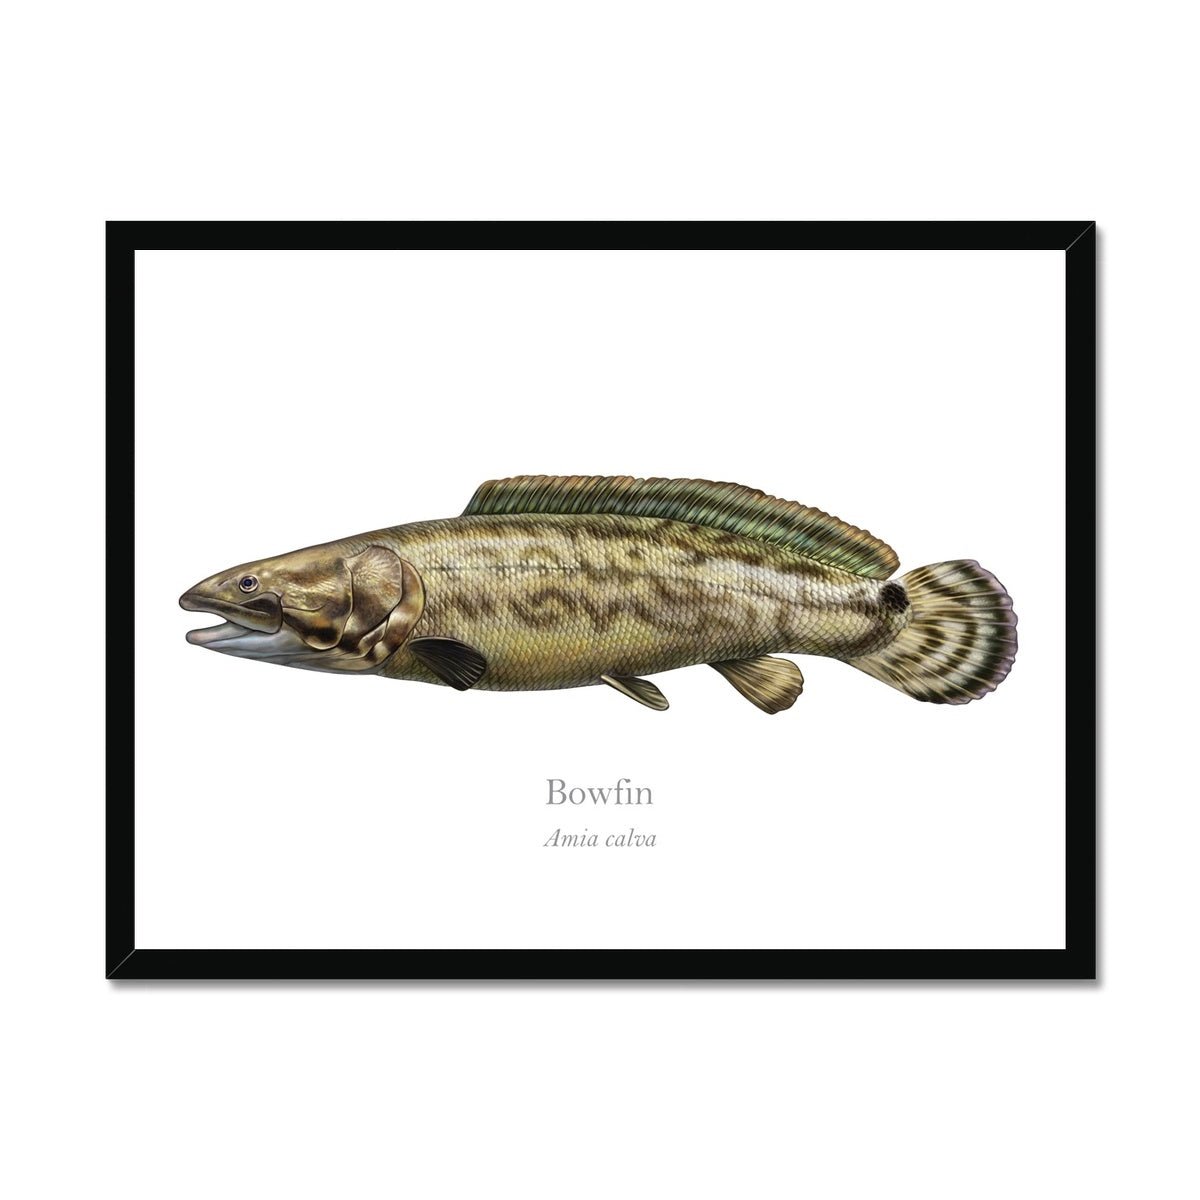 Bowfin - Framed Print - With Scientific Name - madfishlab.com